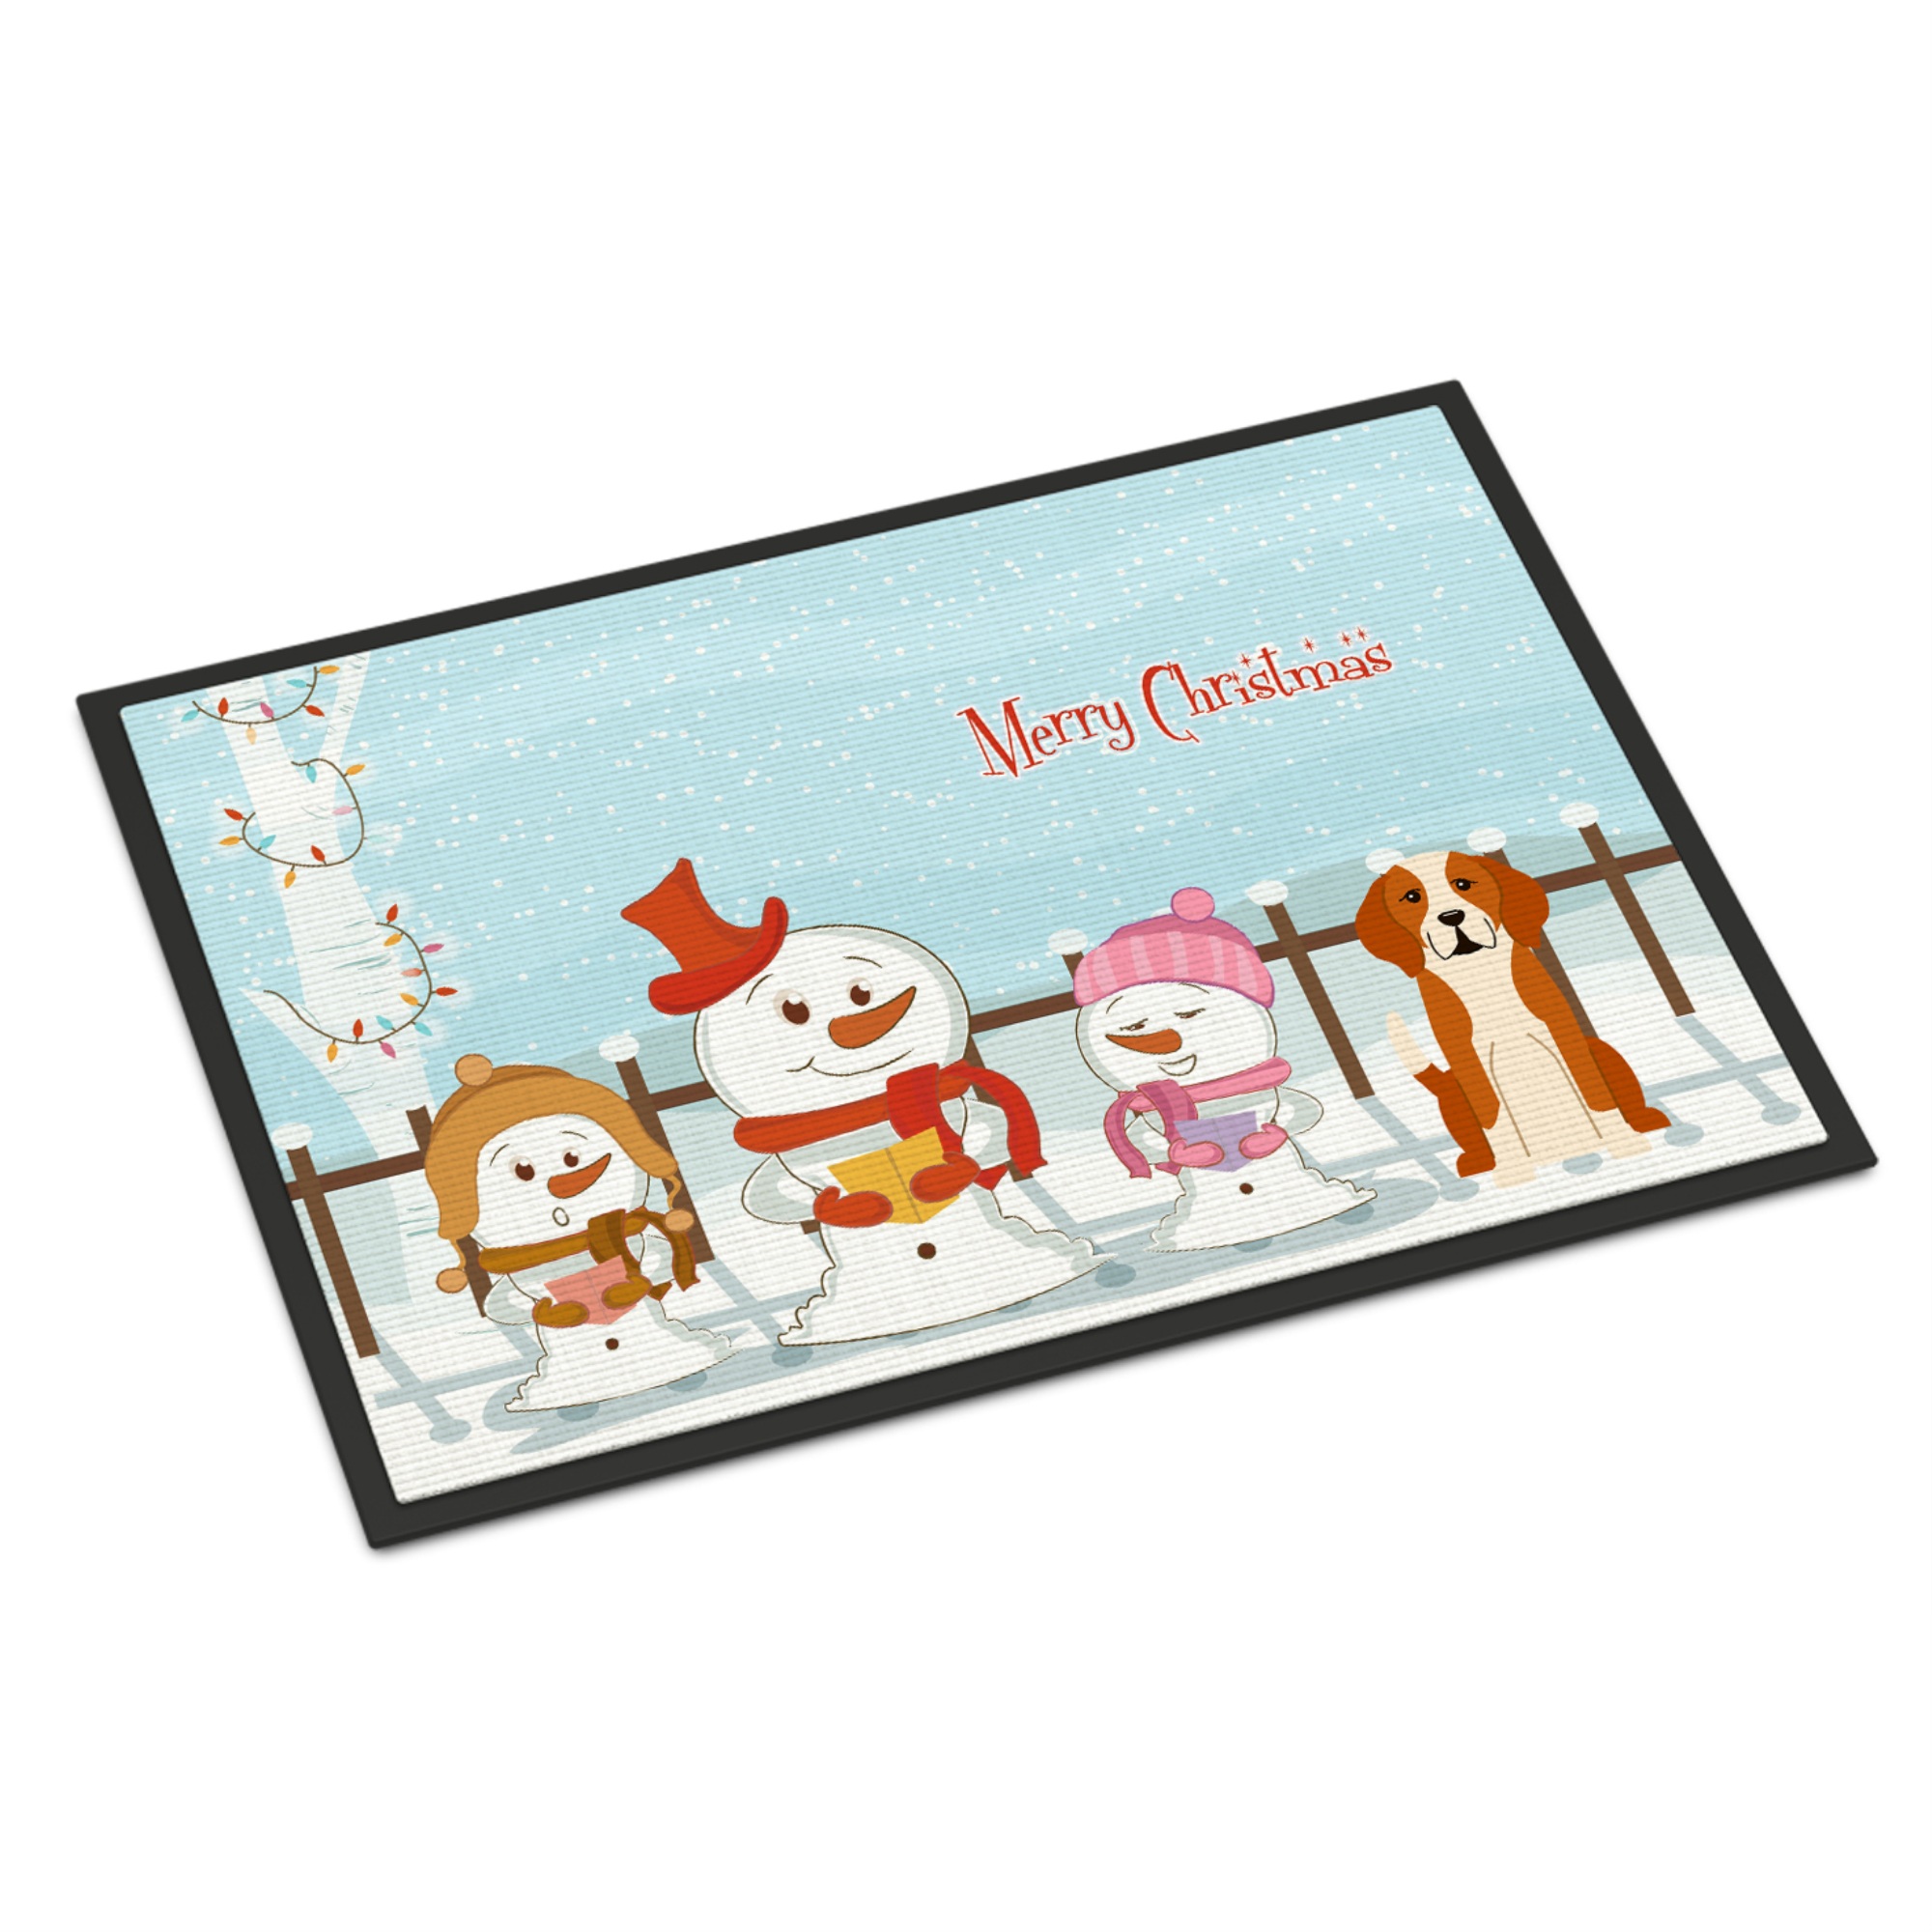 Caroline's Treasures "Caroline's Treasures Merry Christmas Carolers English Foxhound Indoor or Outdoor Mat 18x27 BB2441MAT 18 x 27"" Multicolor"